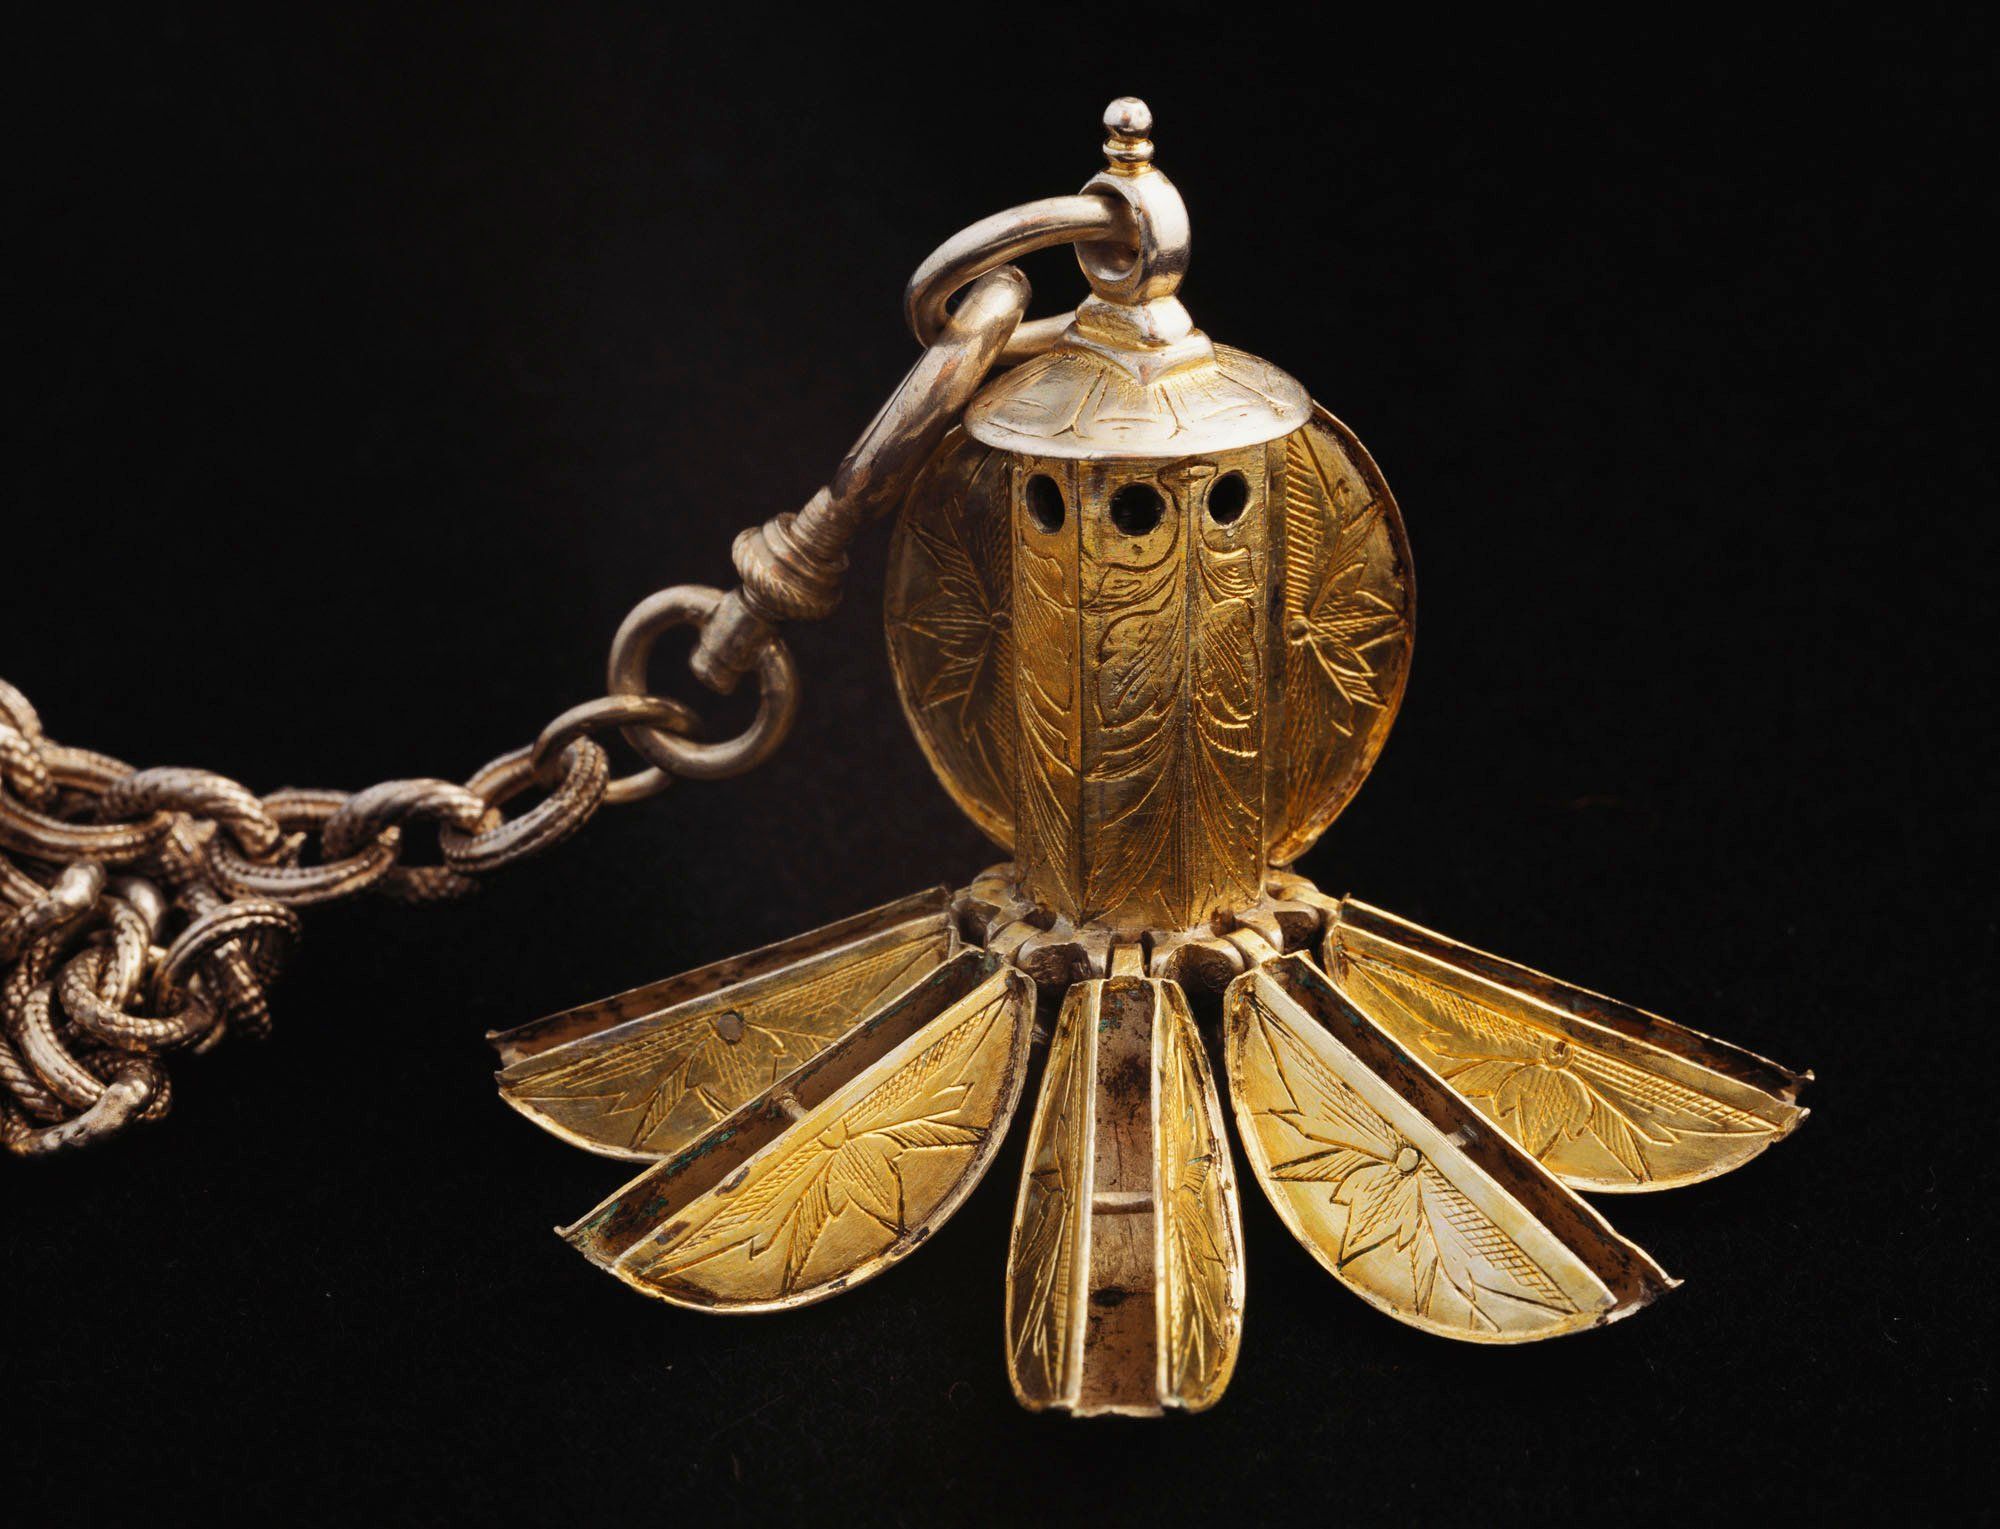 The pomander is said to have belonged to Mary, Queen of Scots (1542-87). 